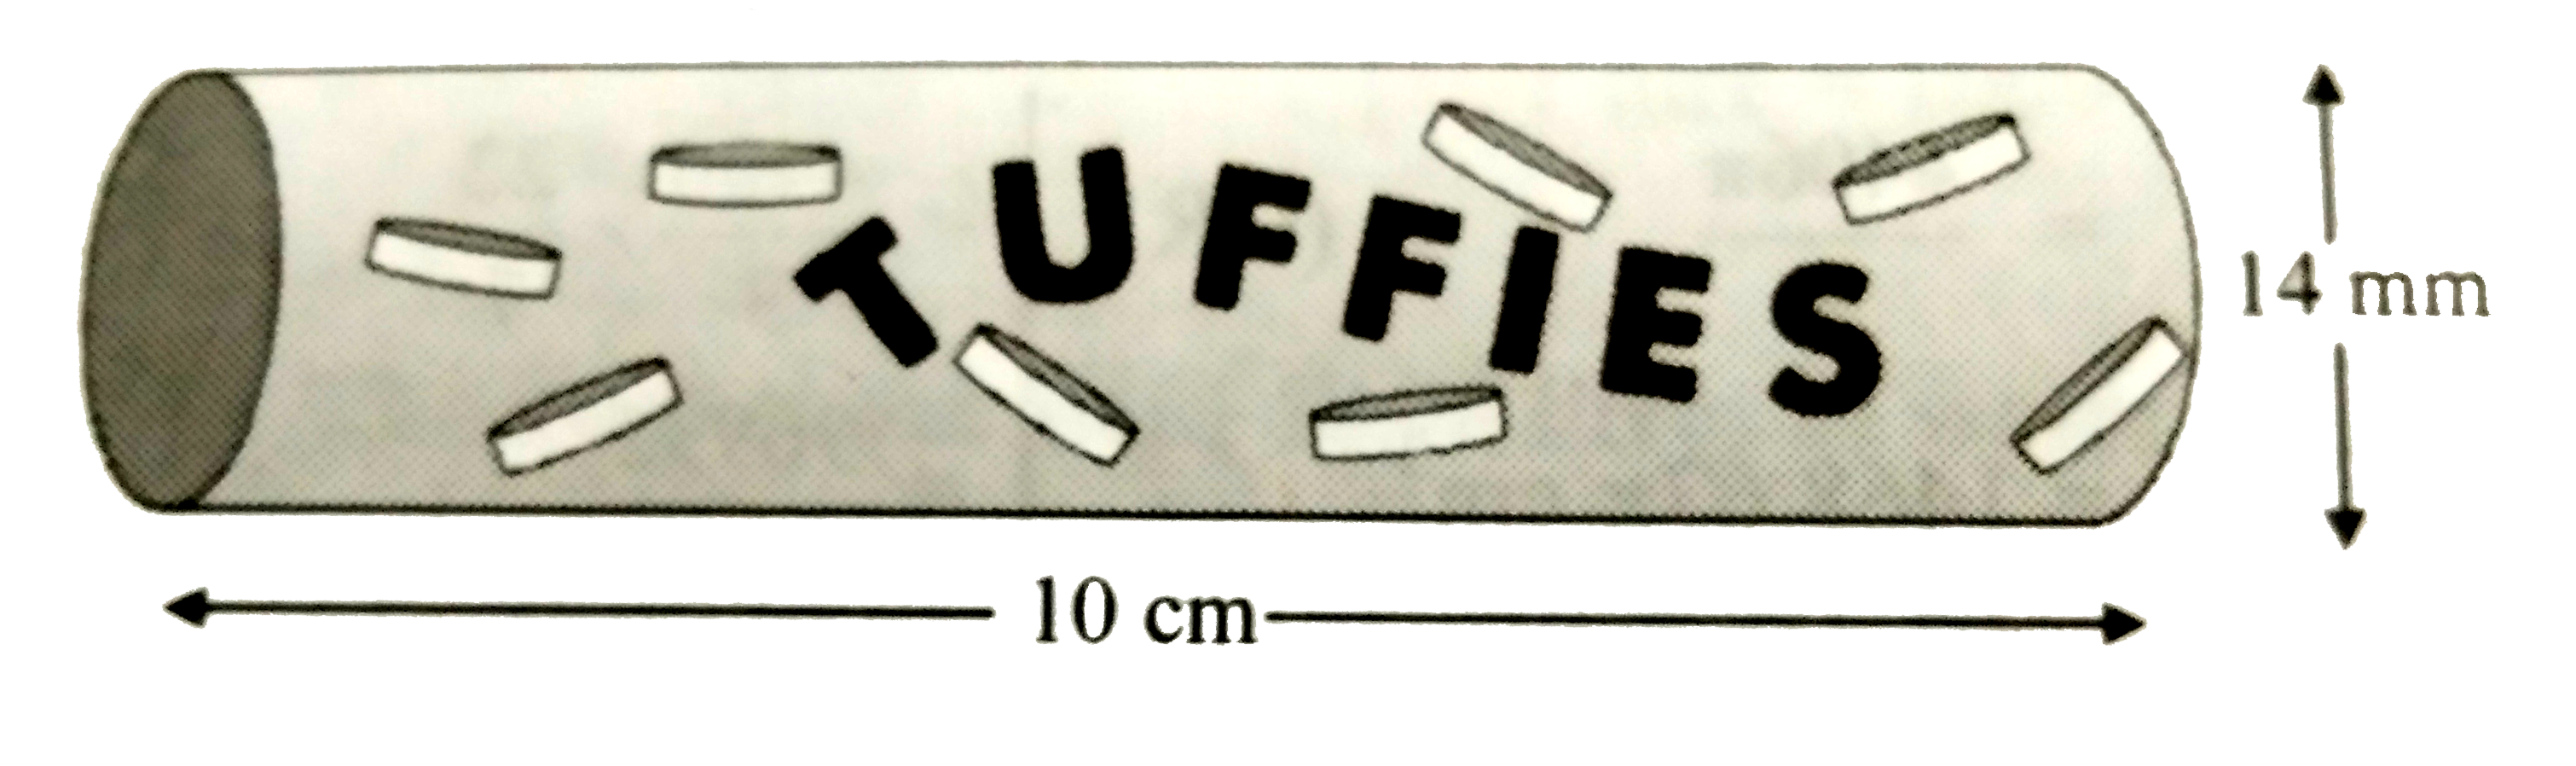 In the given figure, a cylindrical wrapper of flat tablets is shown. The radius of a tablet is 7 mm and its thickness is 5 mm. How many such tablets are warpped in the wrapper?